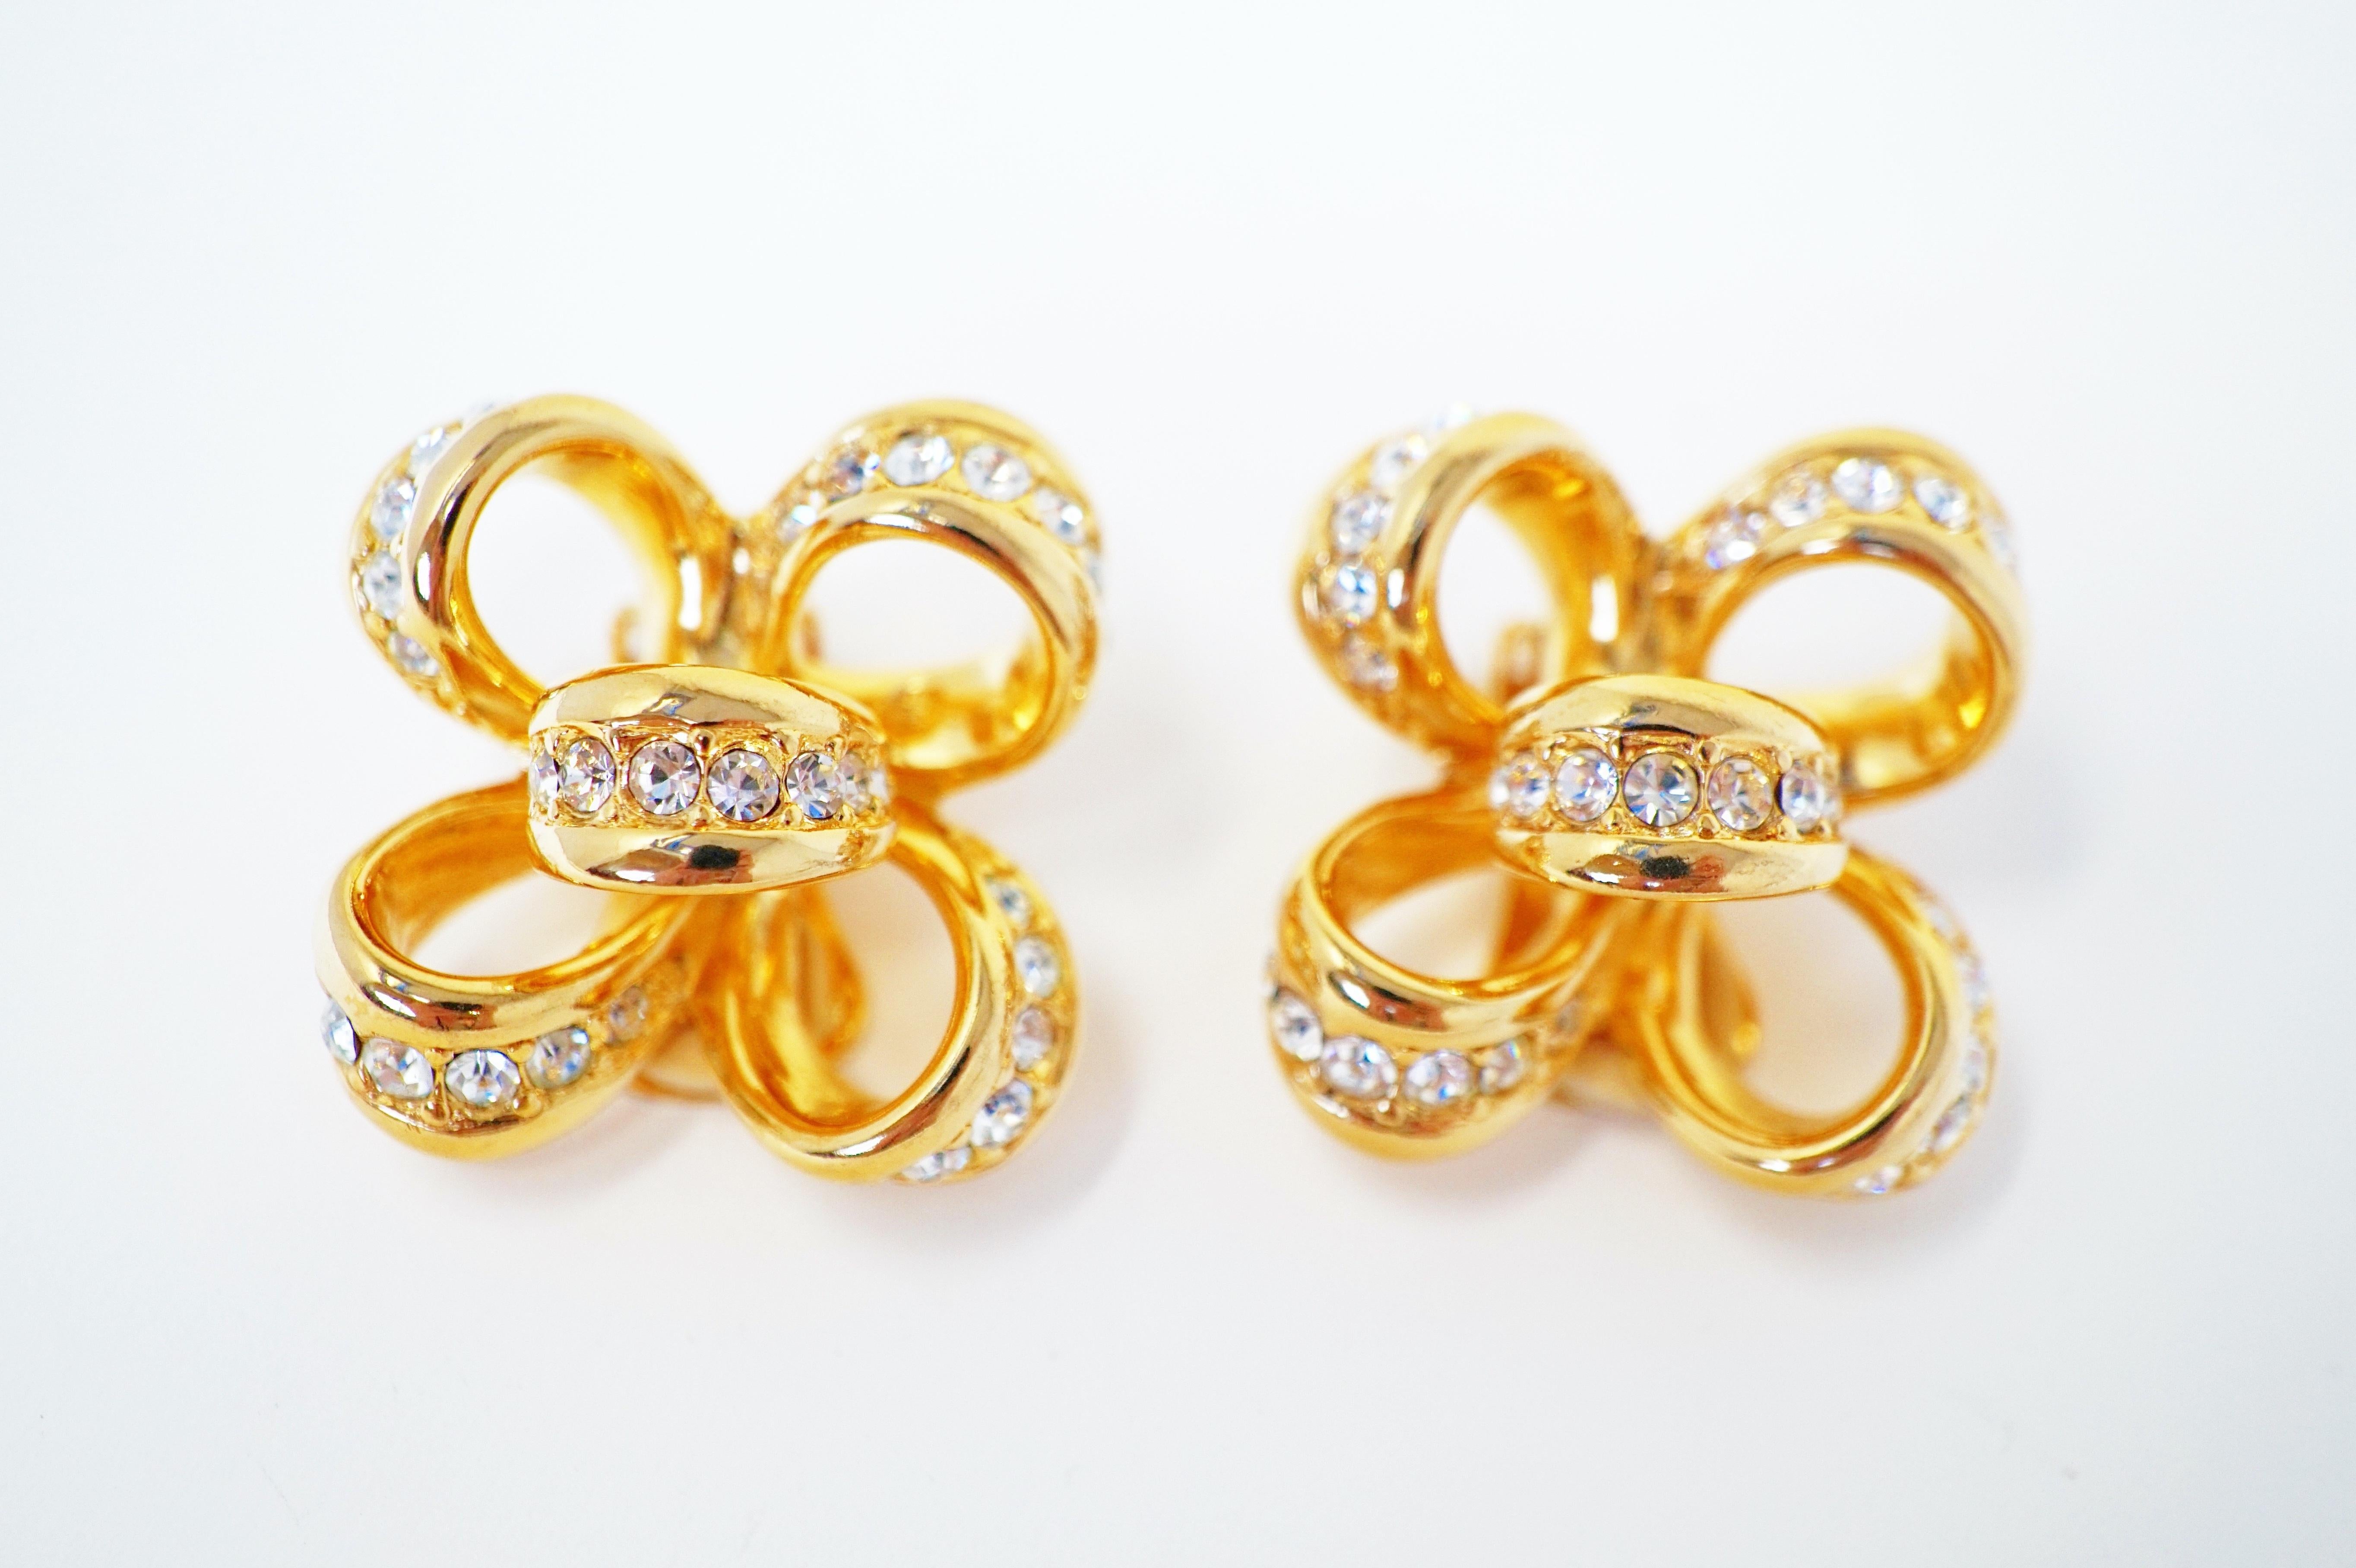 These dazzling & shiny gold-plated clip-on bow earrings by Kenneth Jay Lane are studded with faceted Swarovski crystals and are the perfect compliment to your holiday look!

With a career spanning over 5 decades, the legendary New York designer